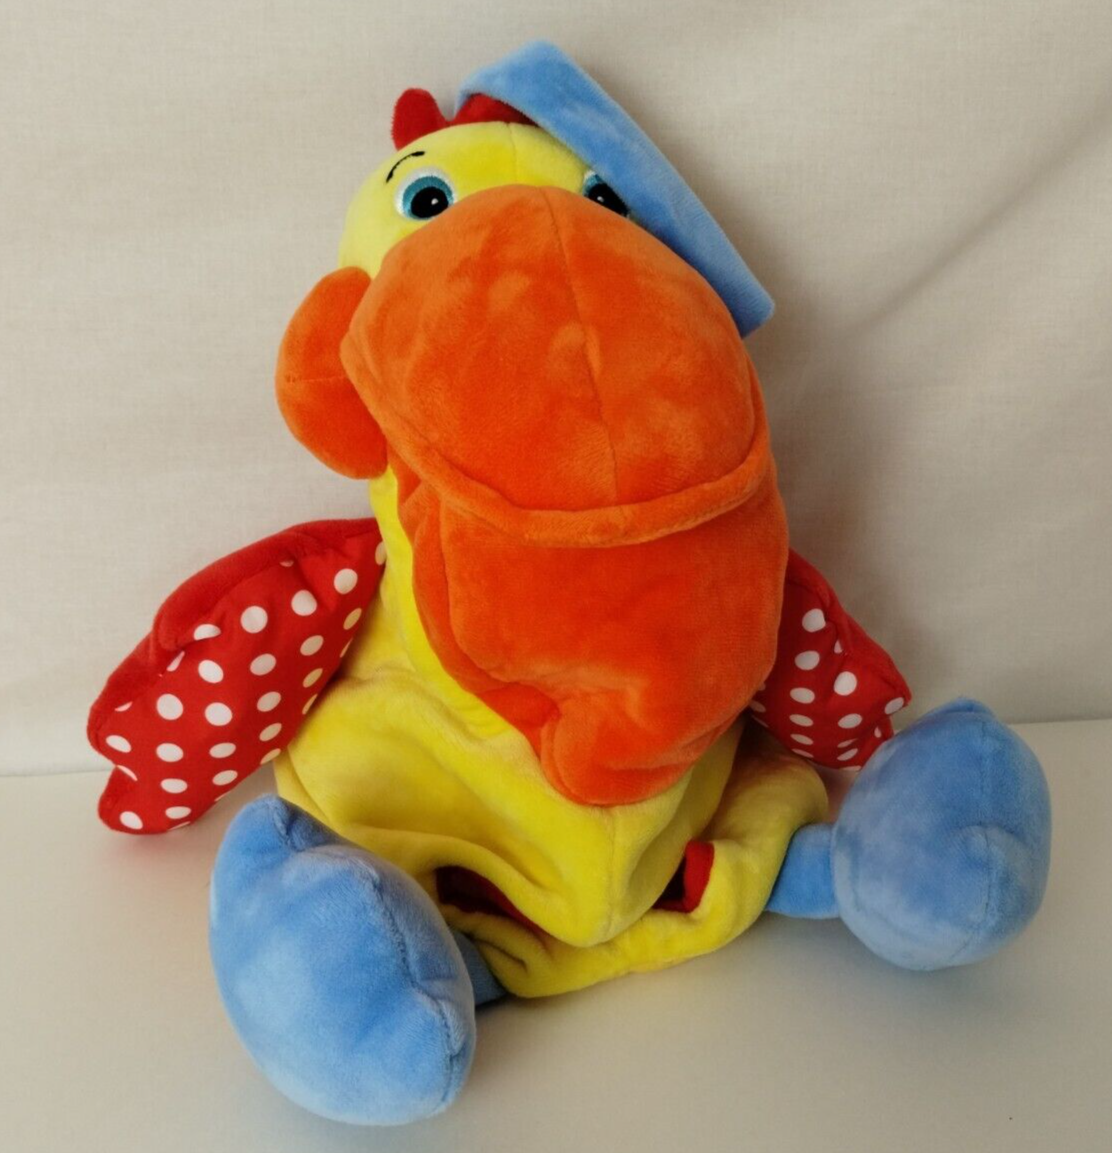 Melissa and Doug K's Kids Hungry Pelican Plush Figure Baby Toy - $11.88